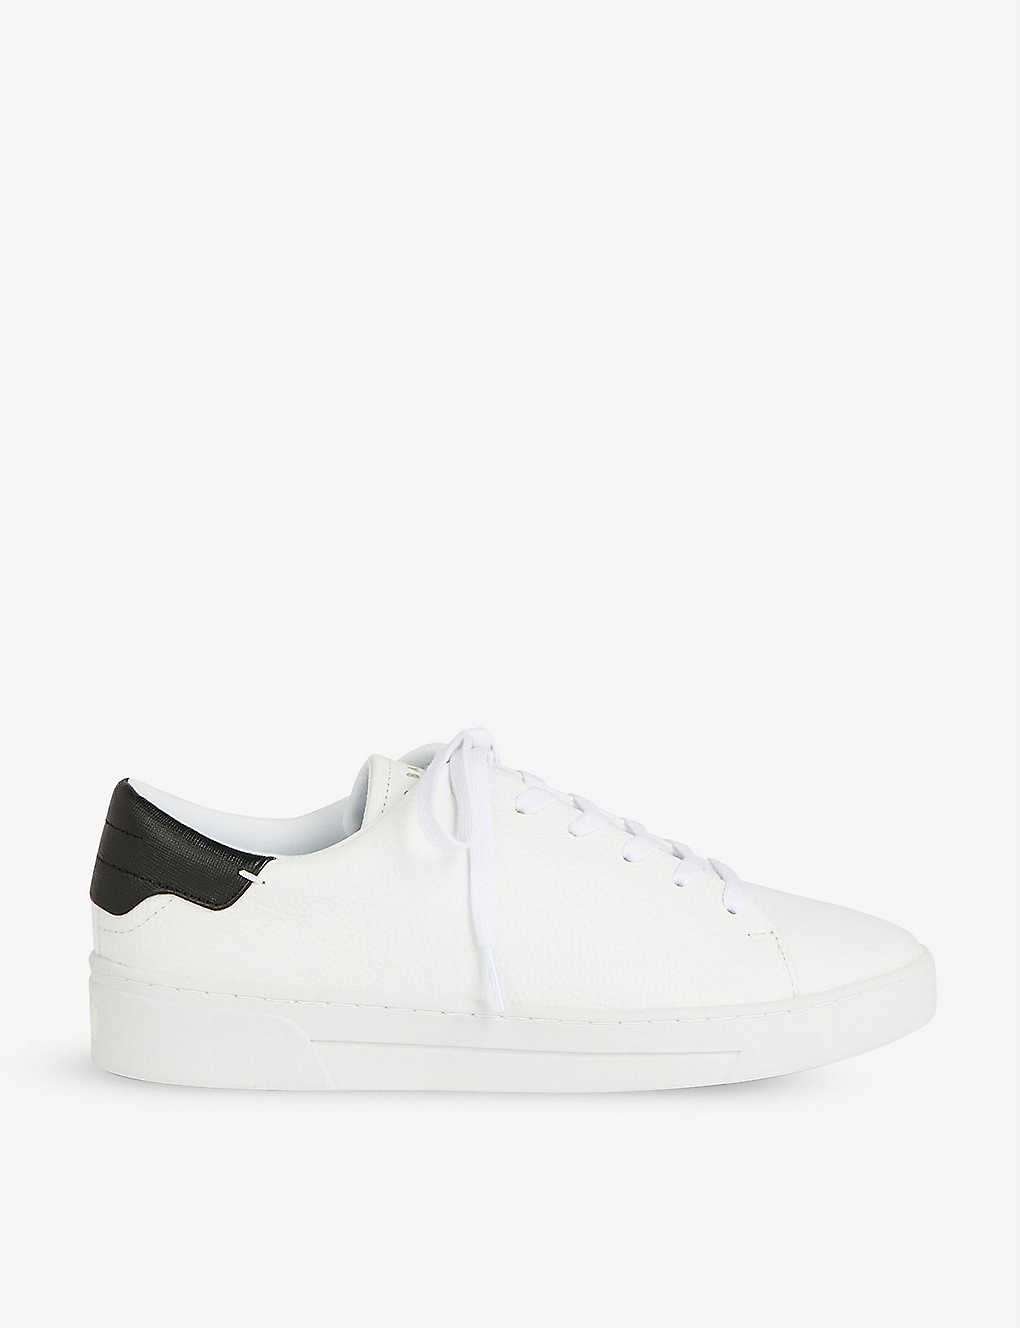 Shop Ted Baker Women's White-blk Kimmii Contrast-heel Leather Low-top Trainers